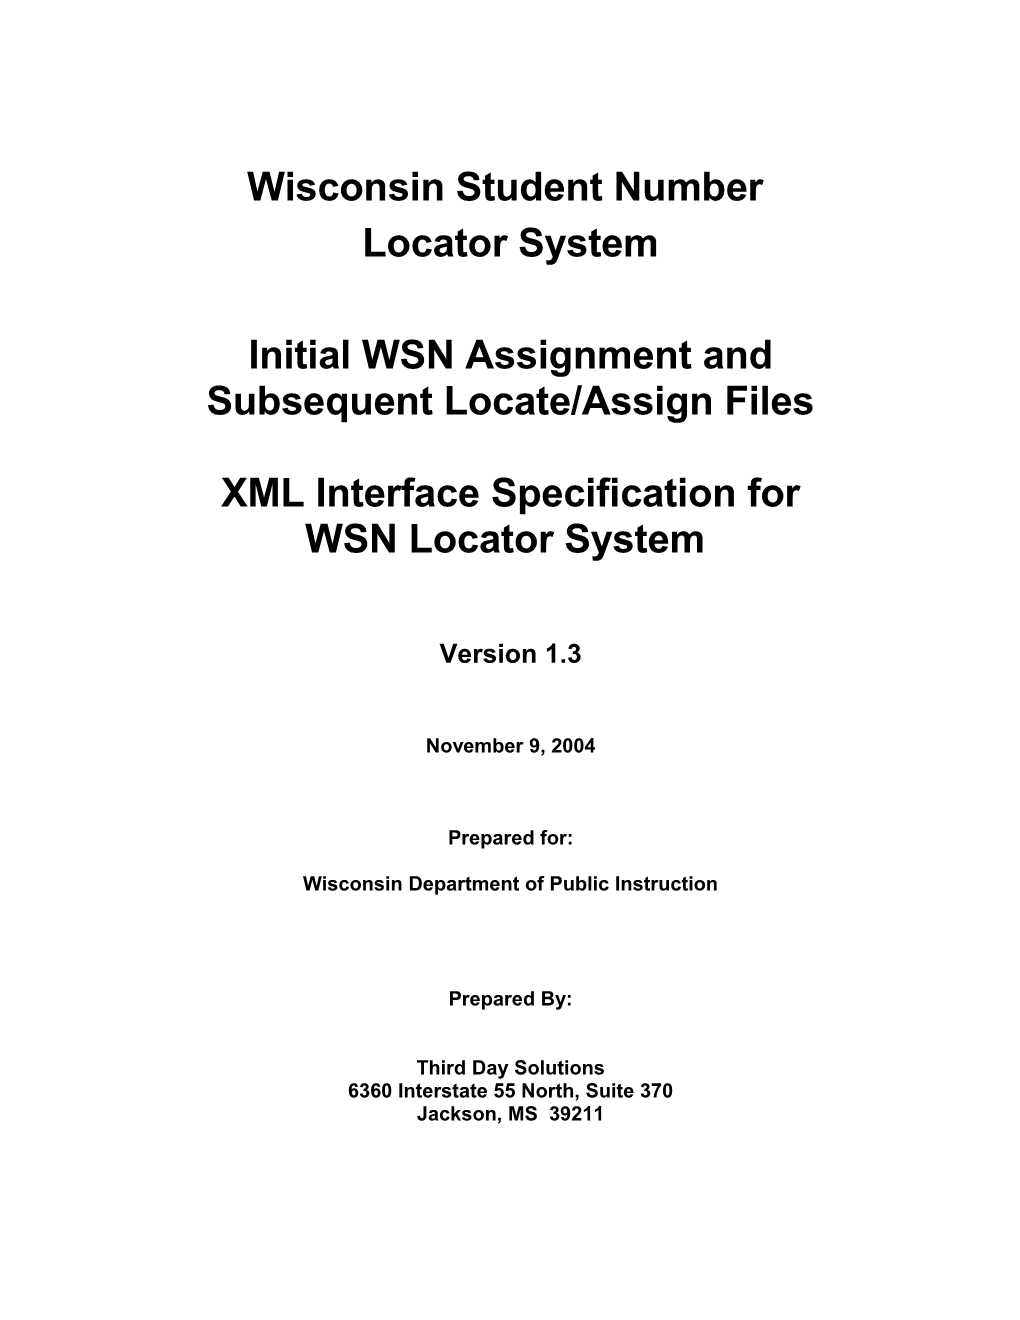 Wisconsin Student Number Locator System